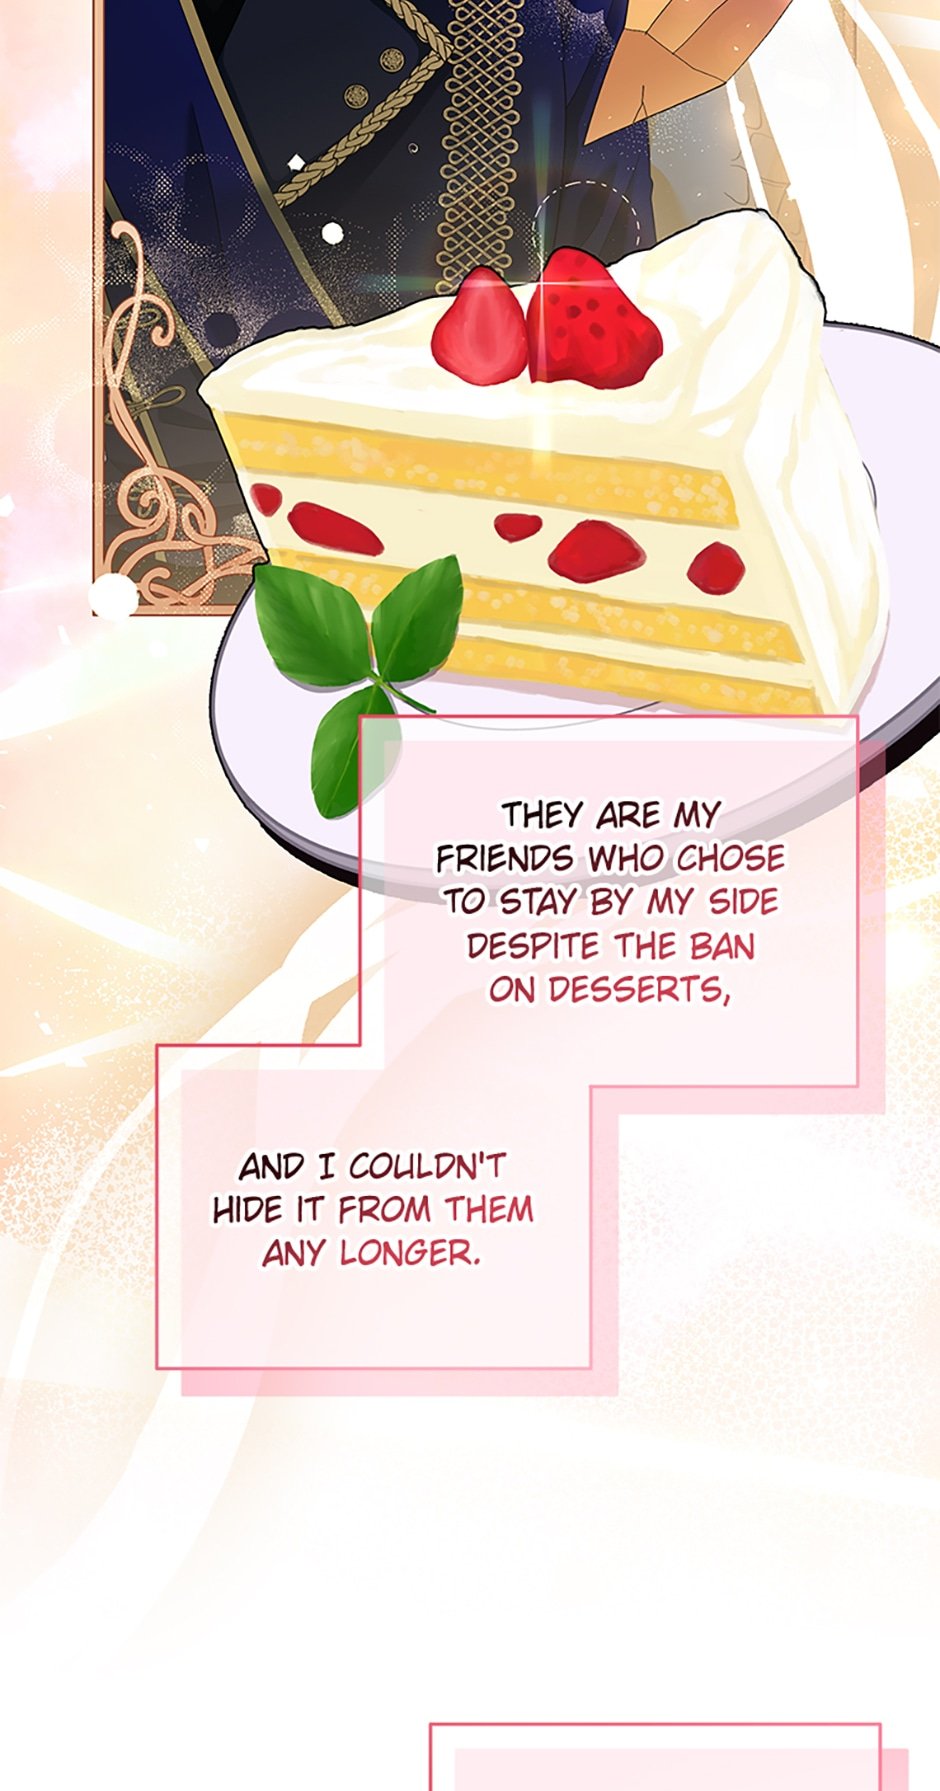 She came back and opened a dessert shop chapter 46